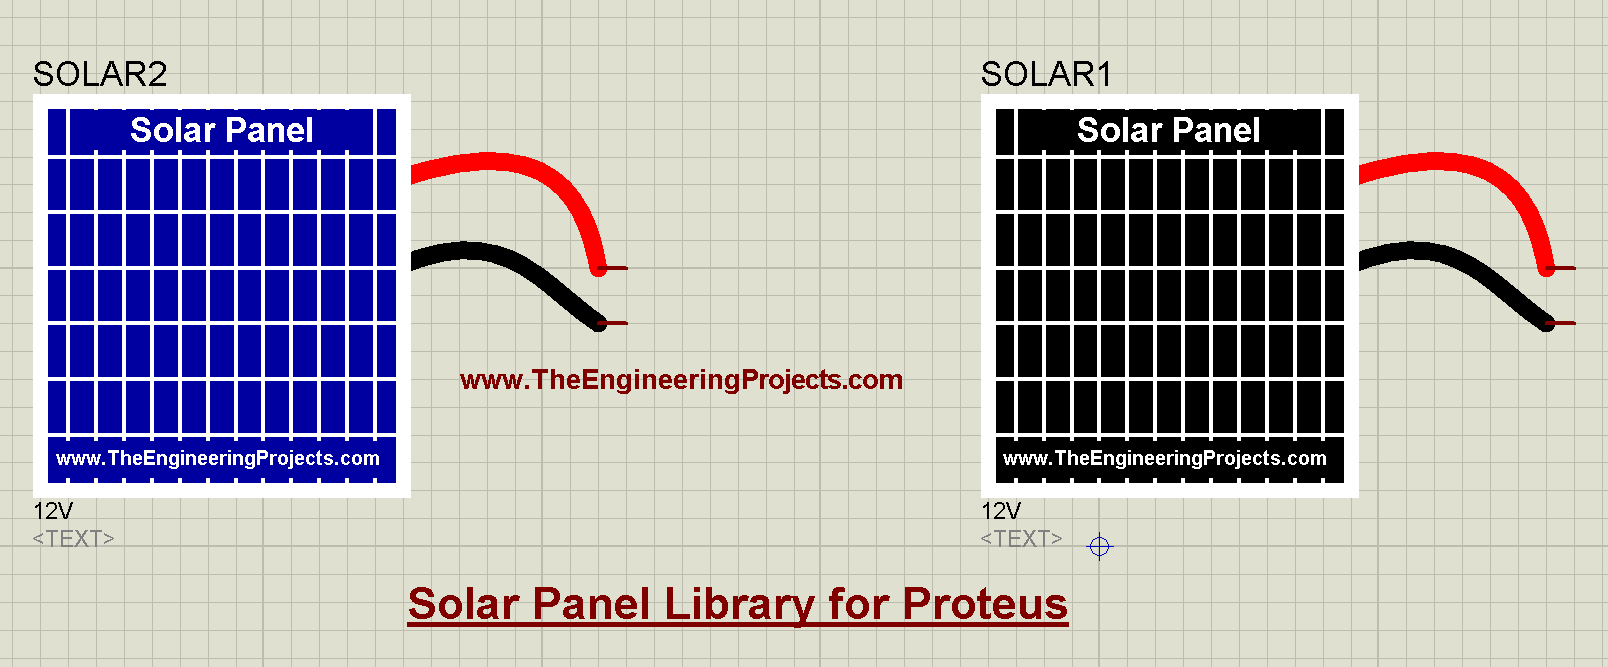 Solar Panel Library for Proteus, Solar Panel in Proteus, Solar Panel Library Proteus, Solar Panel Proteus, Solar Panel Proteus simulation, Proteus Solar Panel, Proteus simulation of Solar Panel